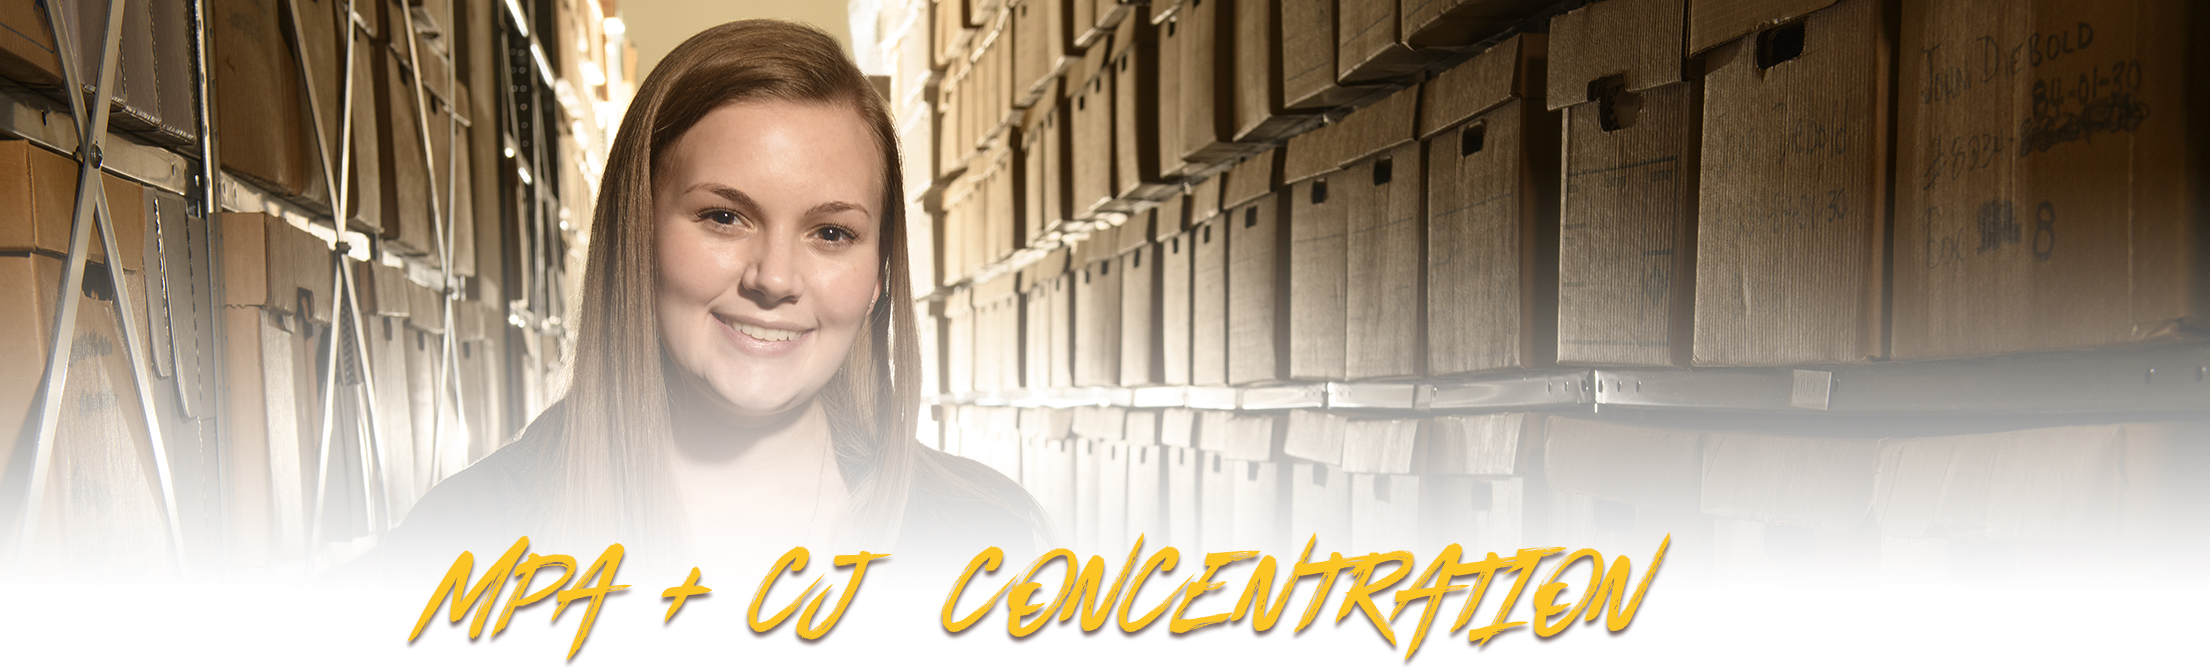 clarissa anderson represents the mpa program with criminal justice concentration in coe library stacks